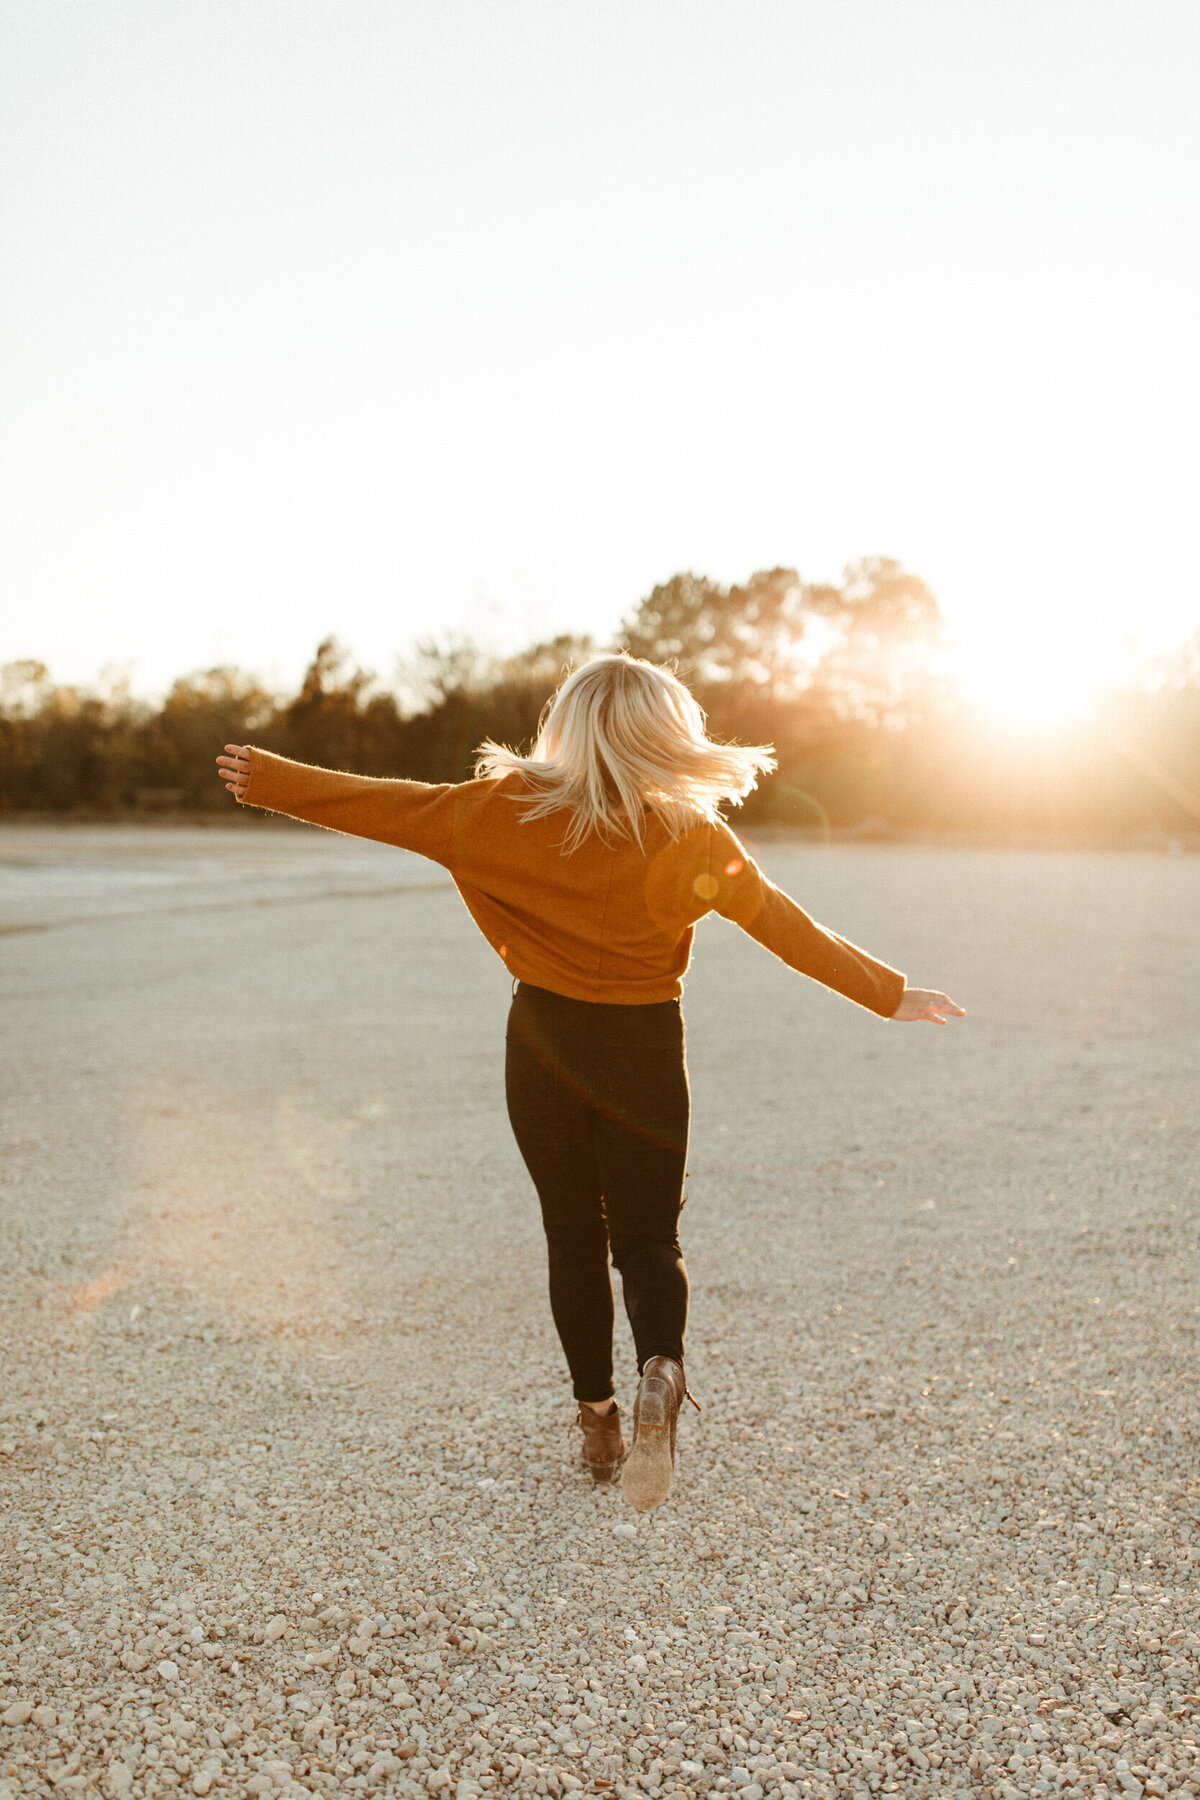 High school senior in baggy sweater running and twirling in a big open gravel area with the sunset behind her